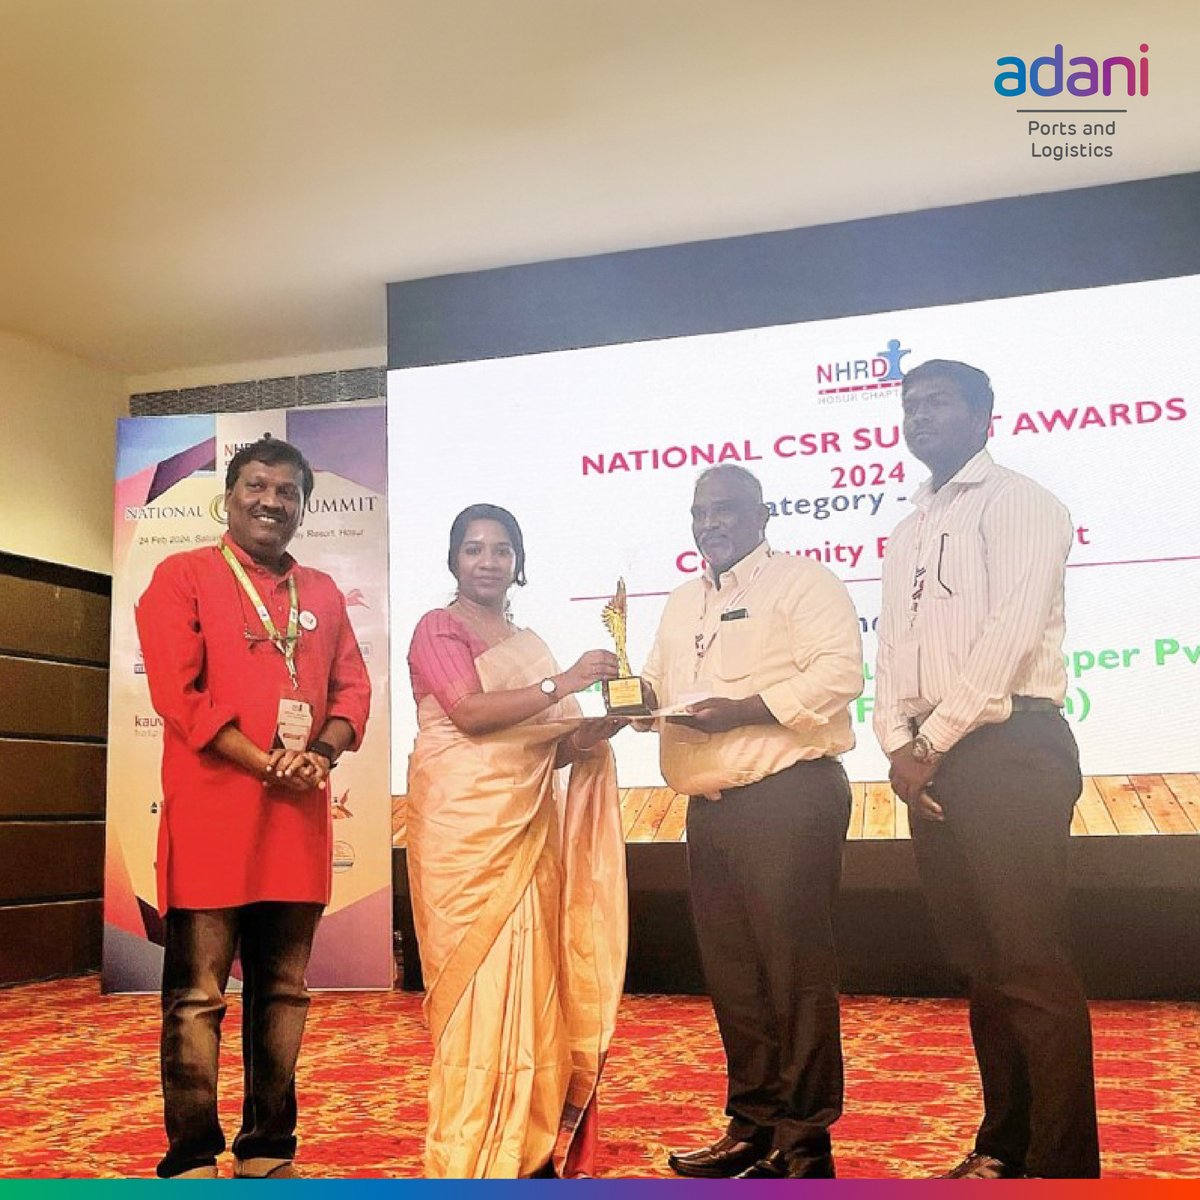 Ennore & Kattupalli's CSR team garners recognition, clinching the Runner Up spot in the Community Engagement category at the NHRD CSR Summit Awards during the esteemed NHRD CSR Conference in Hosur.